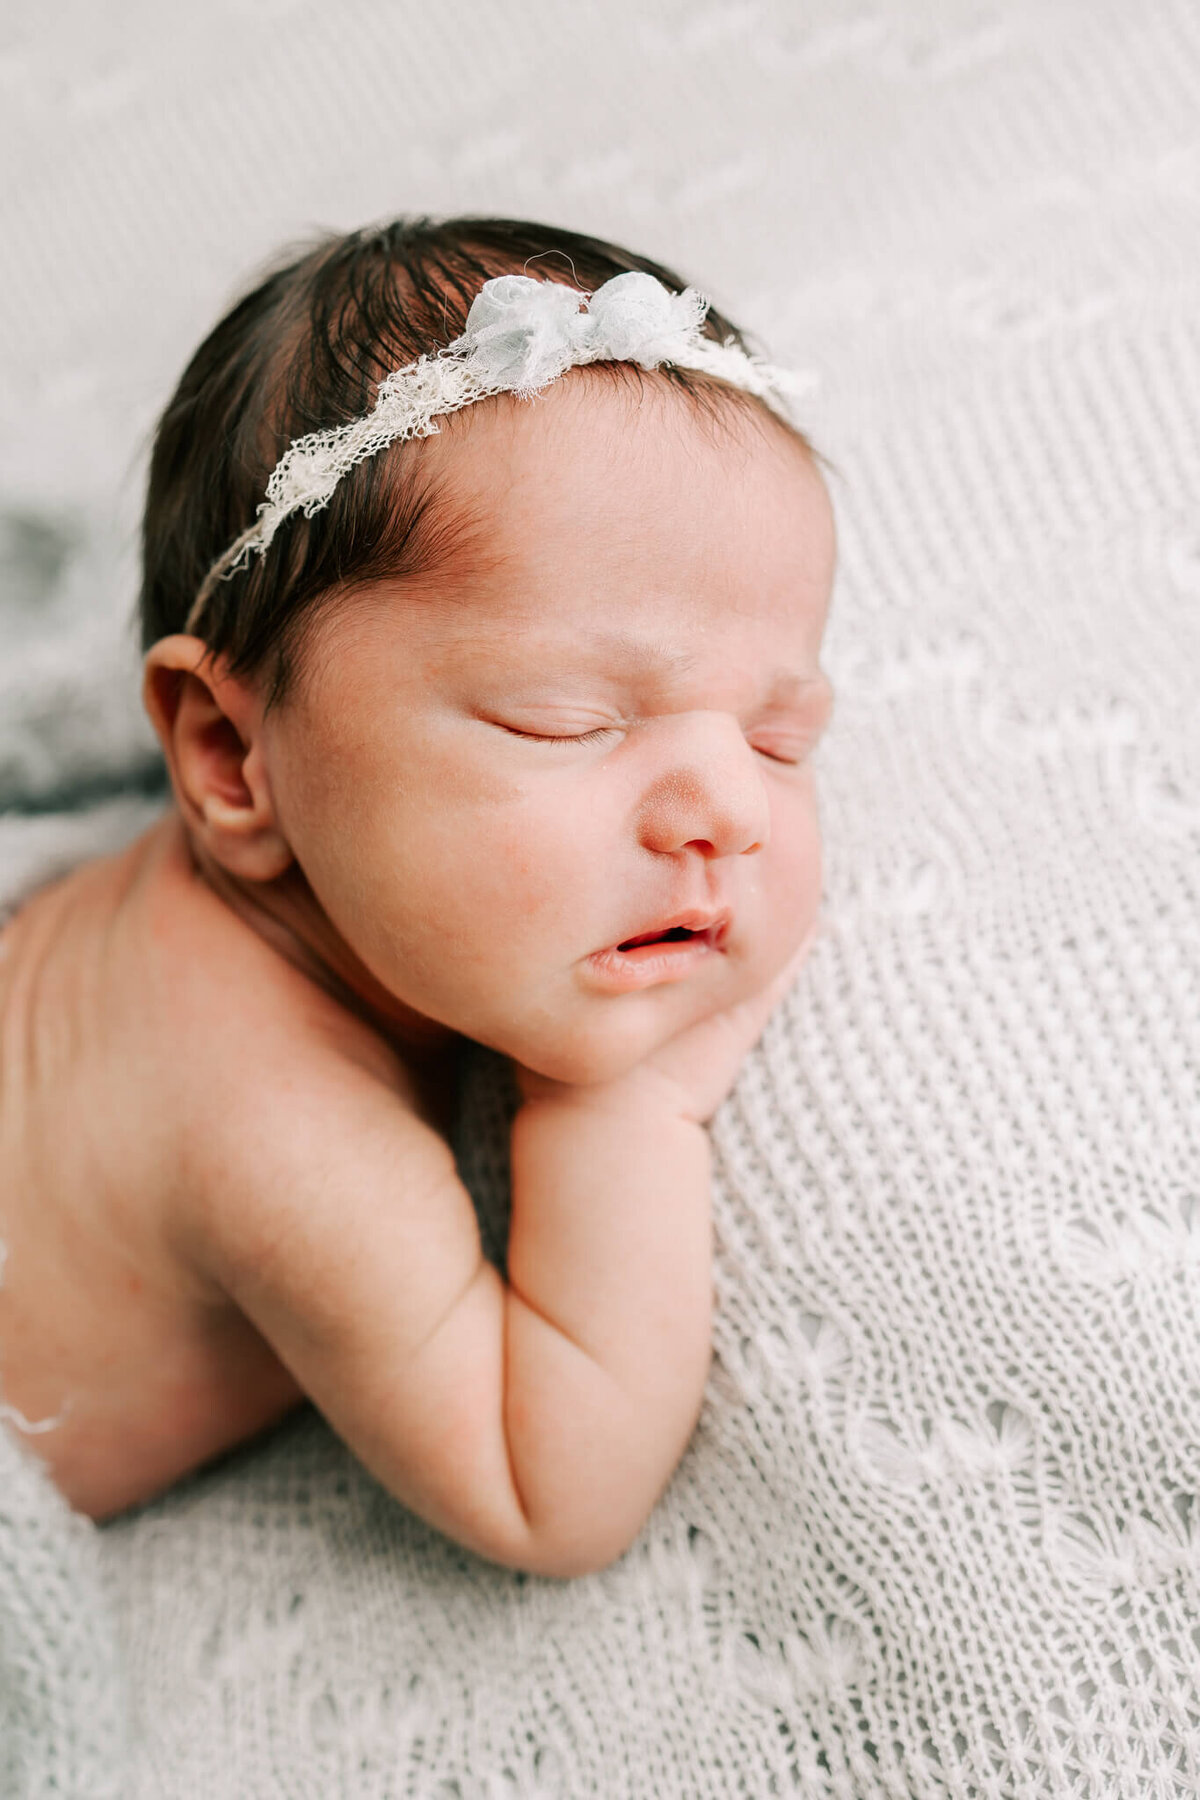 infant girl sleeping on a grey blanket with her hands under her chin. she is wearing a blue bow headband